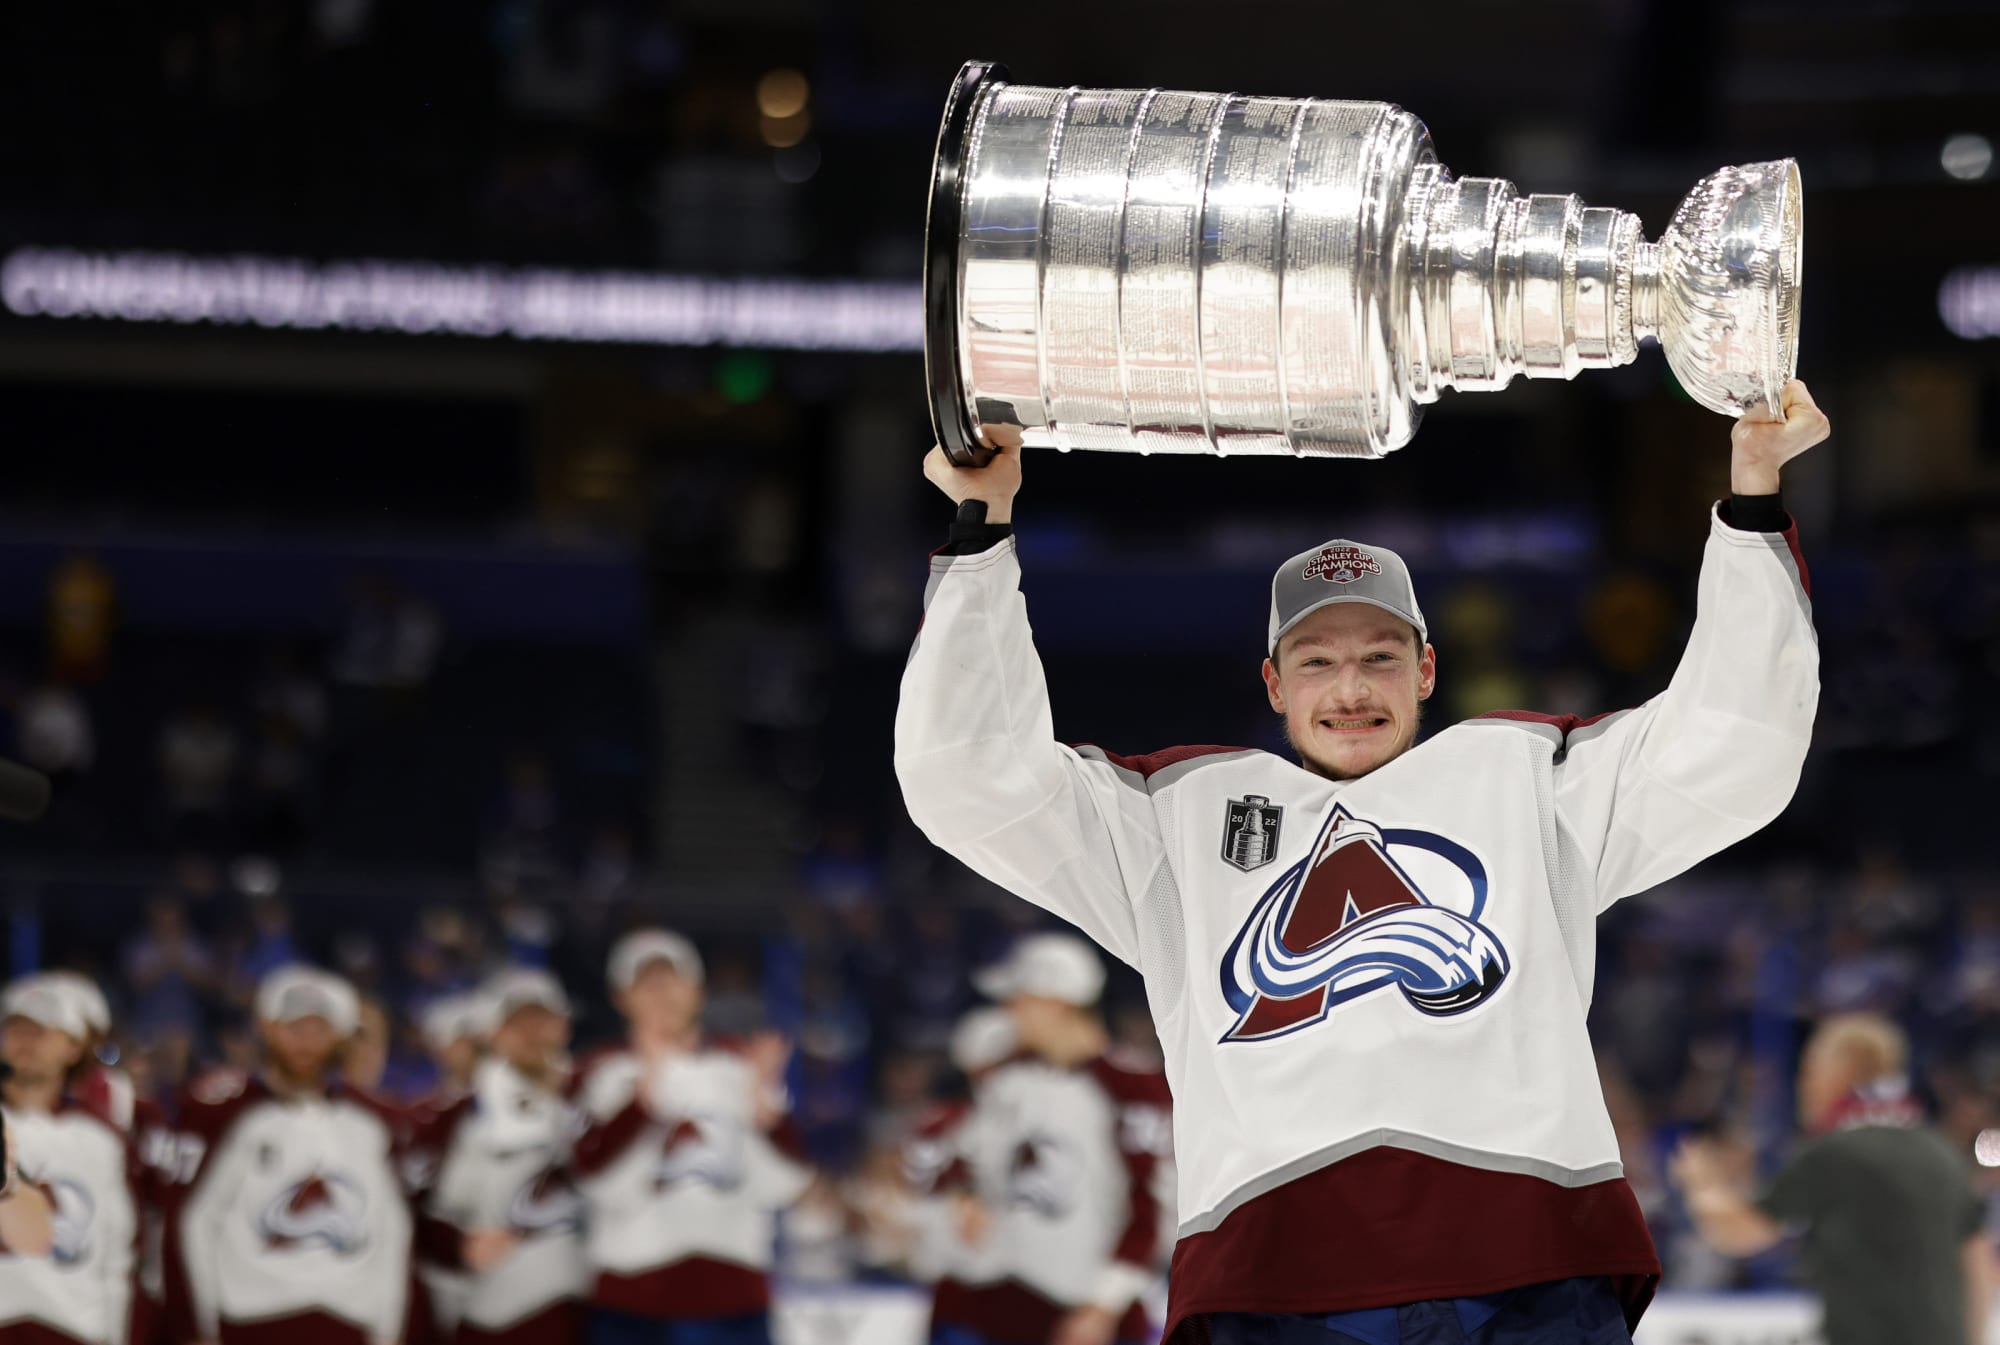 AAA Colorado - Light the lamp and win a pair of season tickets to the  Cup-winning Colorado Avalanche! Get an auto or life insurance quote through  AAA and be entered to win